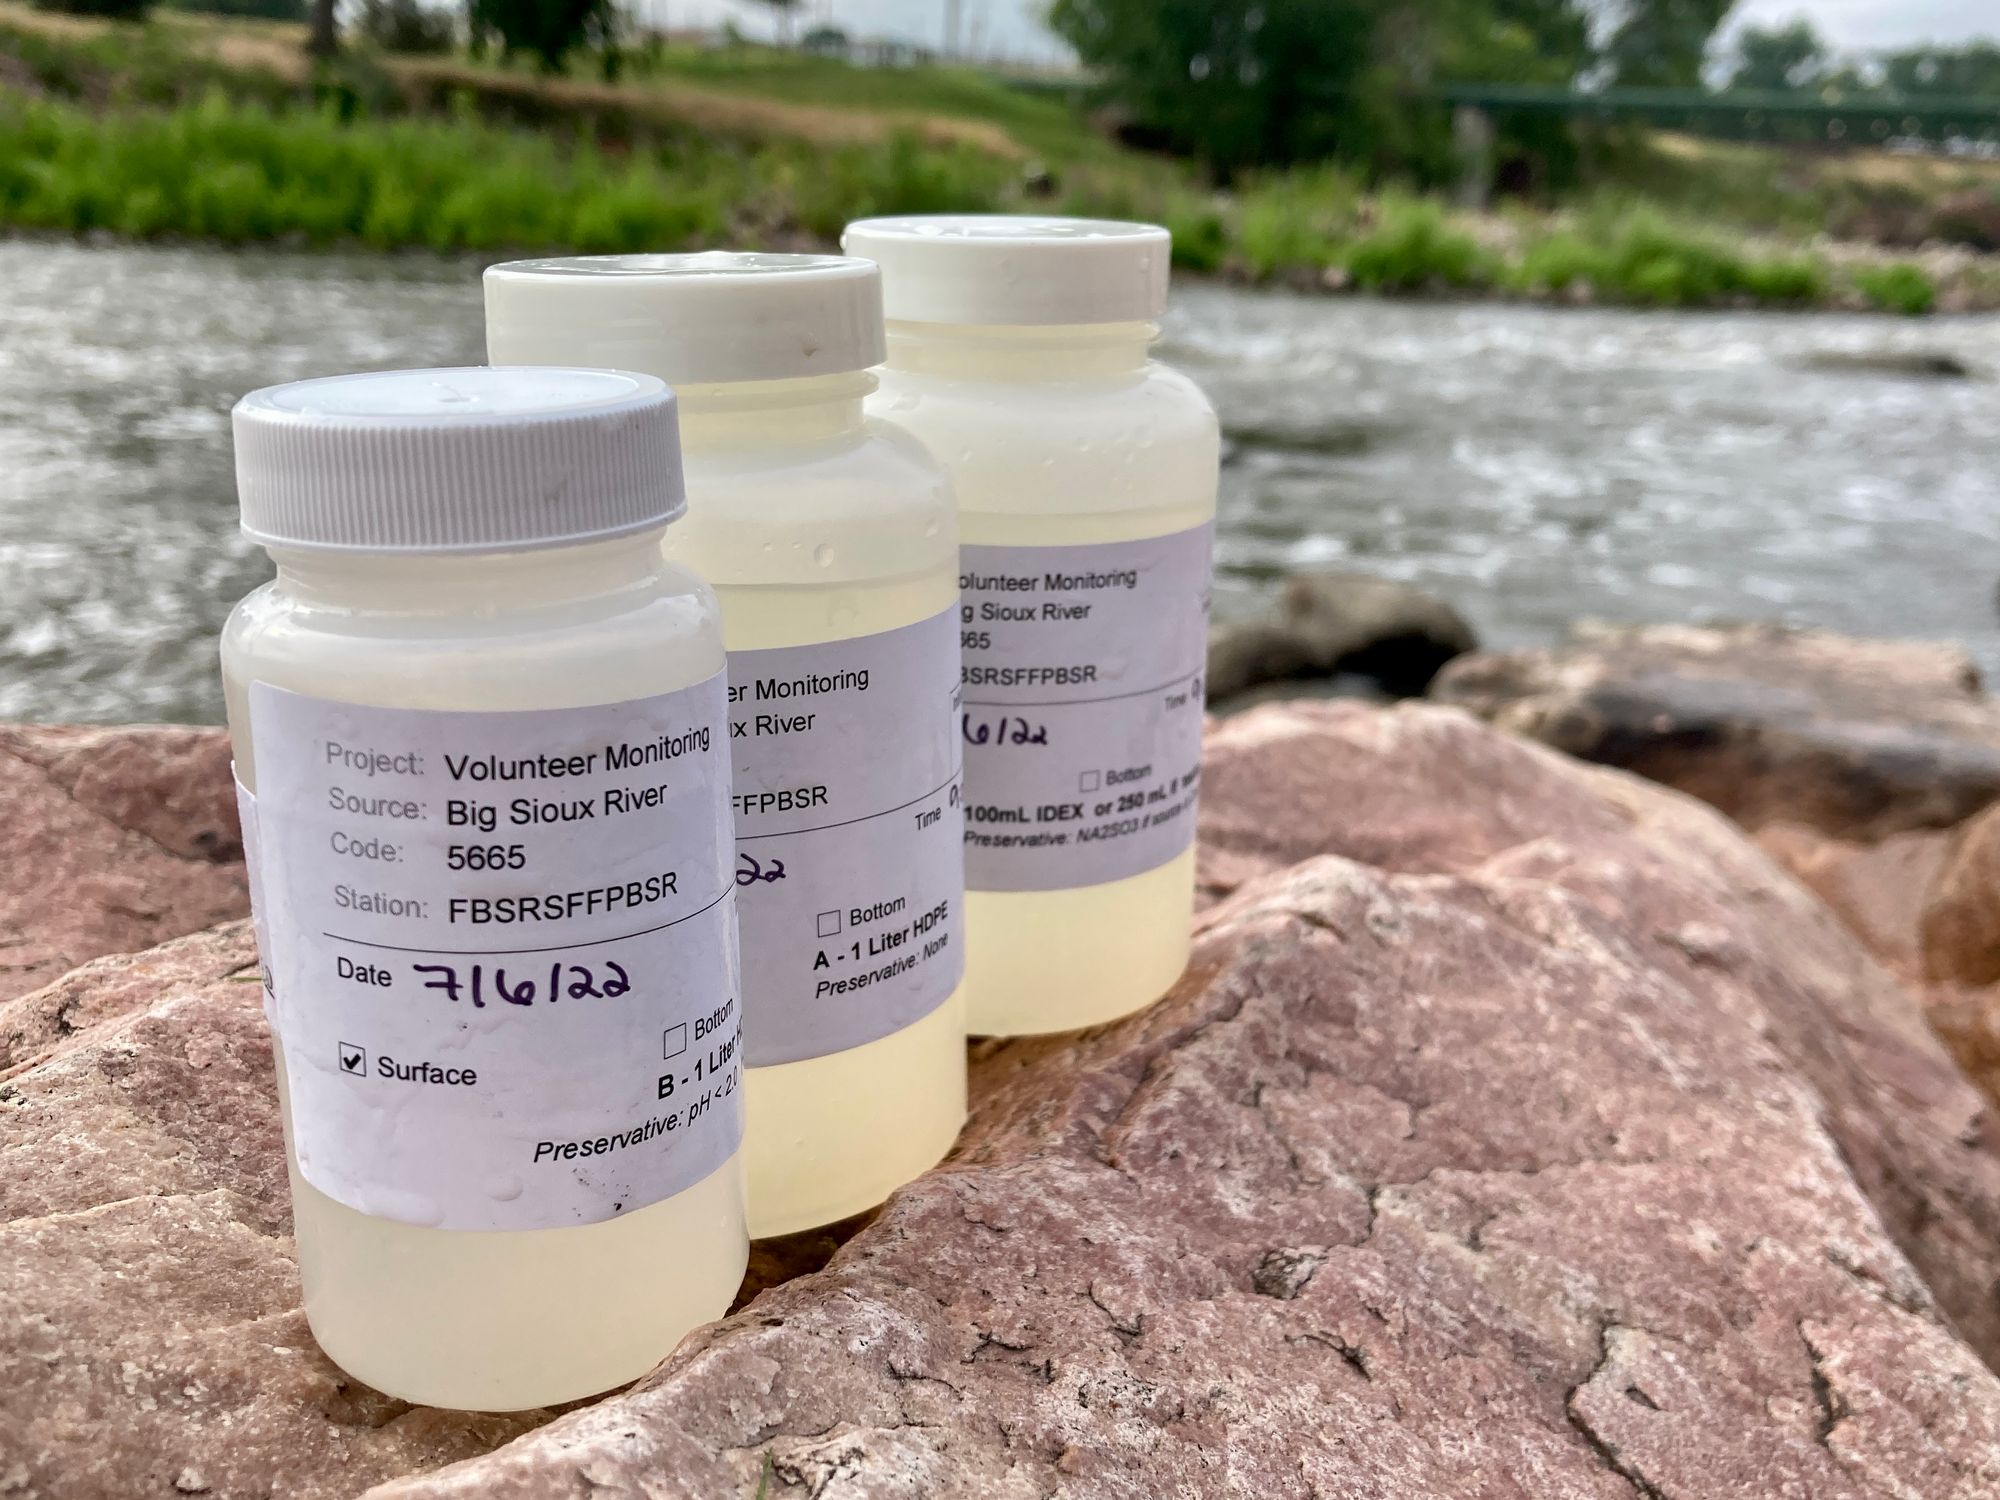 How you can help lessen pollution in the Big Sioux River